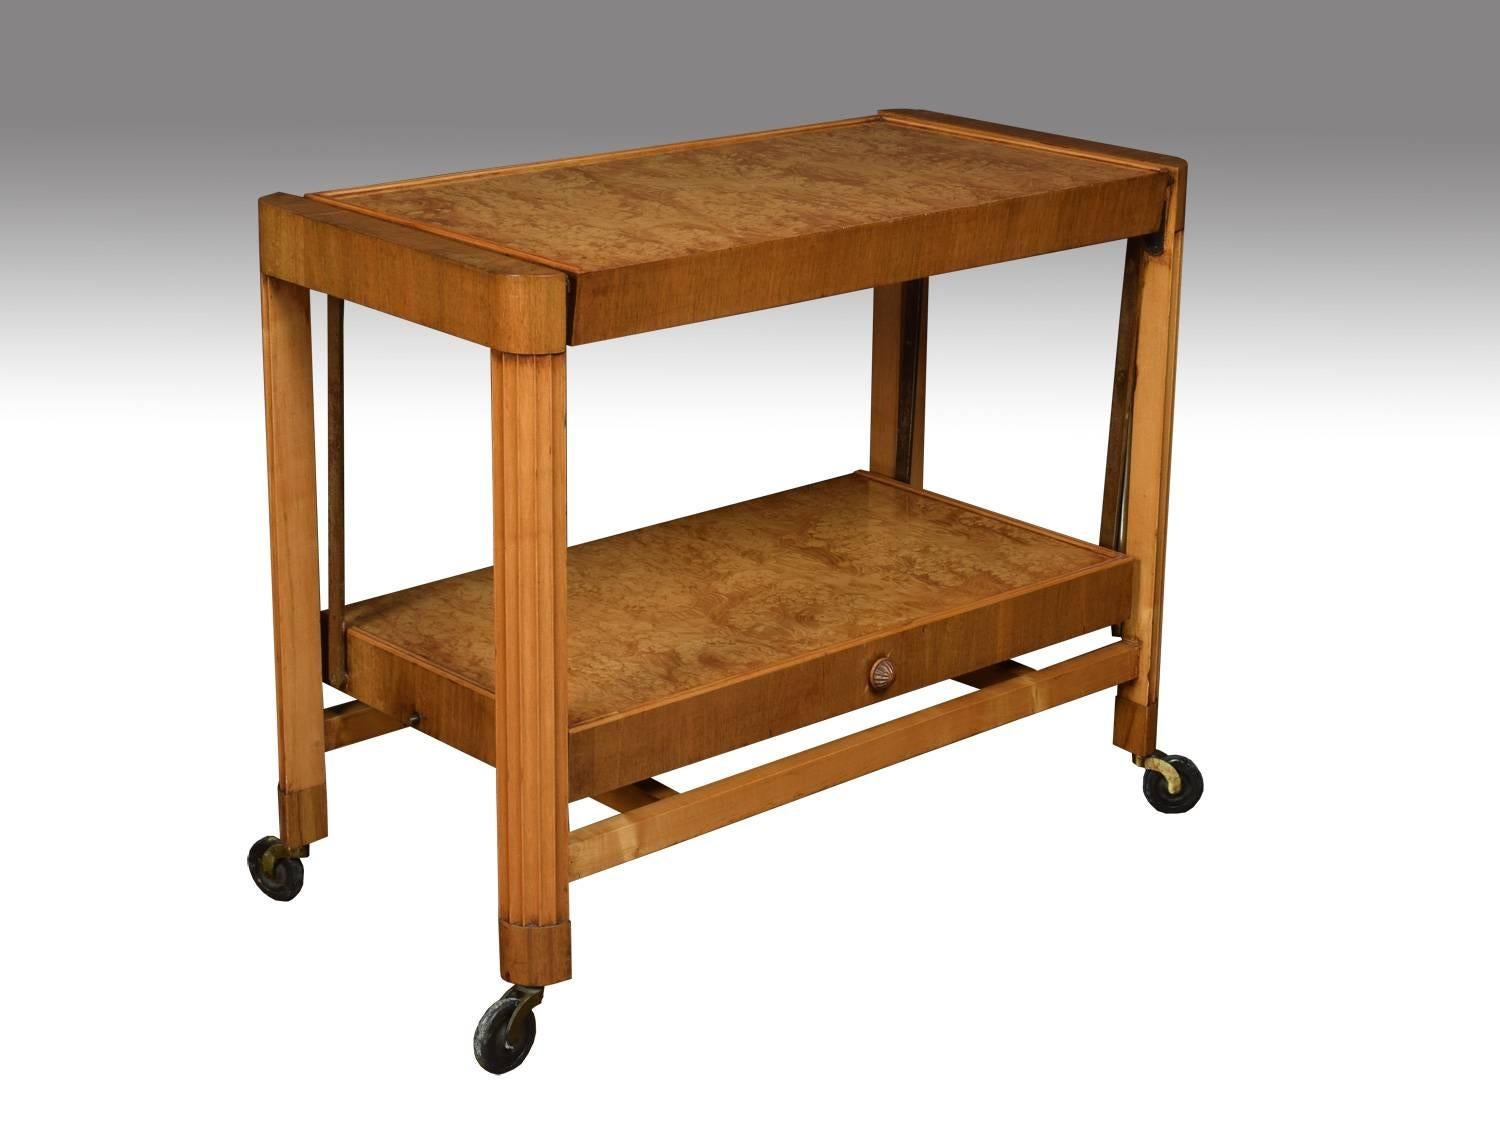 Art Deco metamorphic trolley. It comprises of a top shelf and an under-shelf which folds up on a cantilever to create a tabletop. Supported on four curved reeded supports terminating in castors.

Dimensions:
Height 26 Inches,
length 31.5